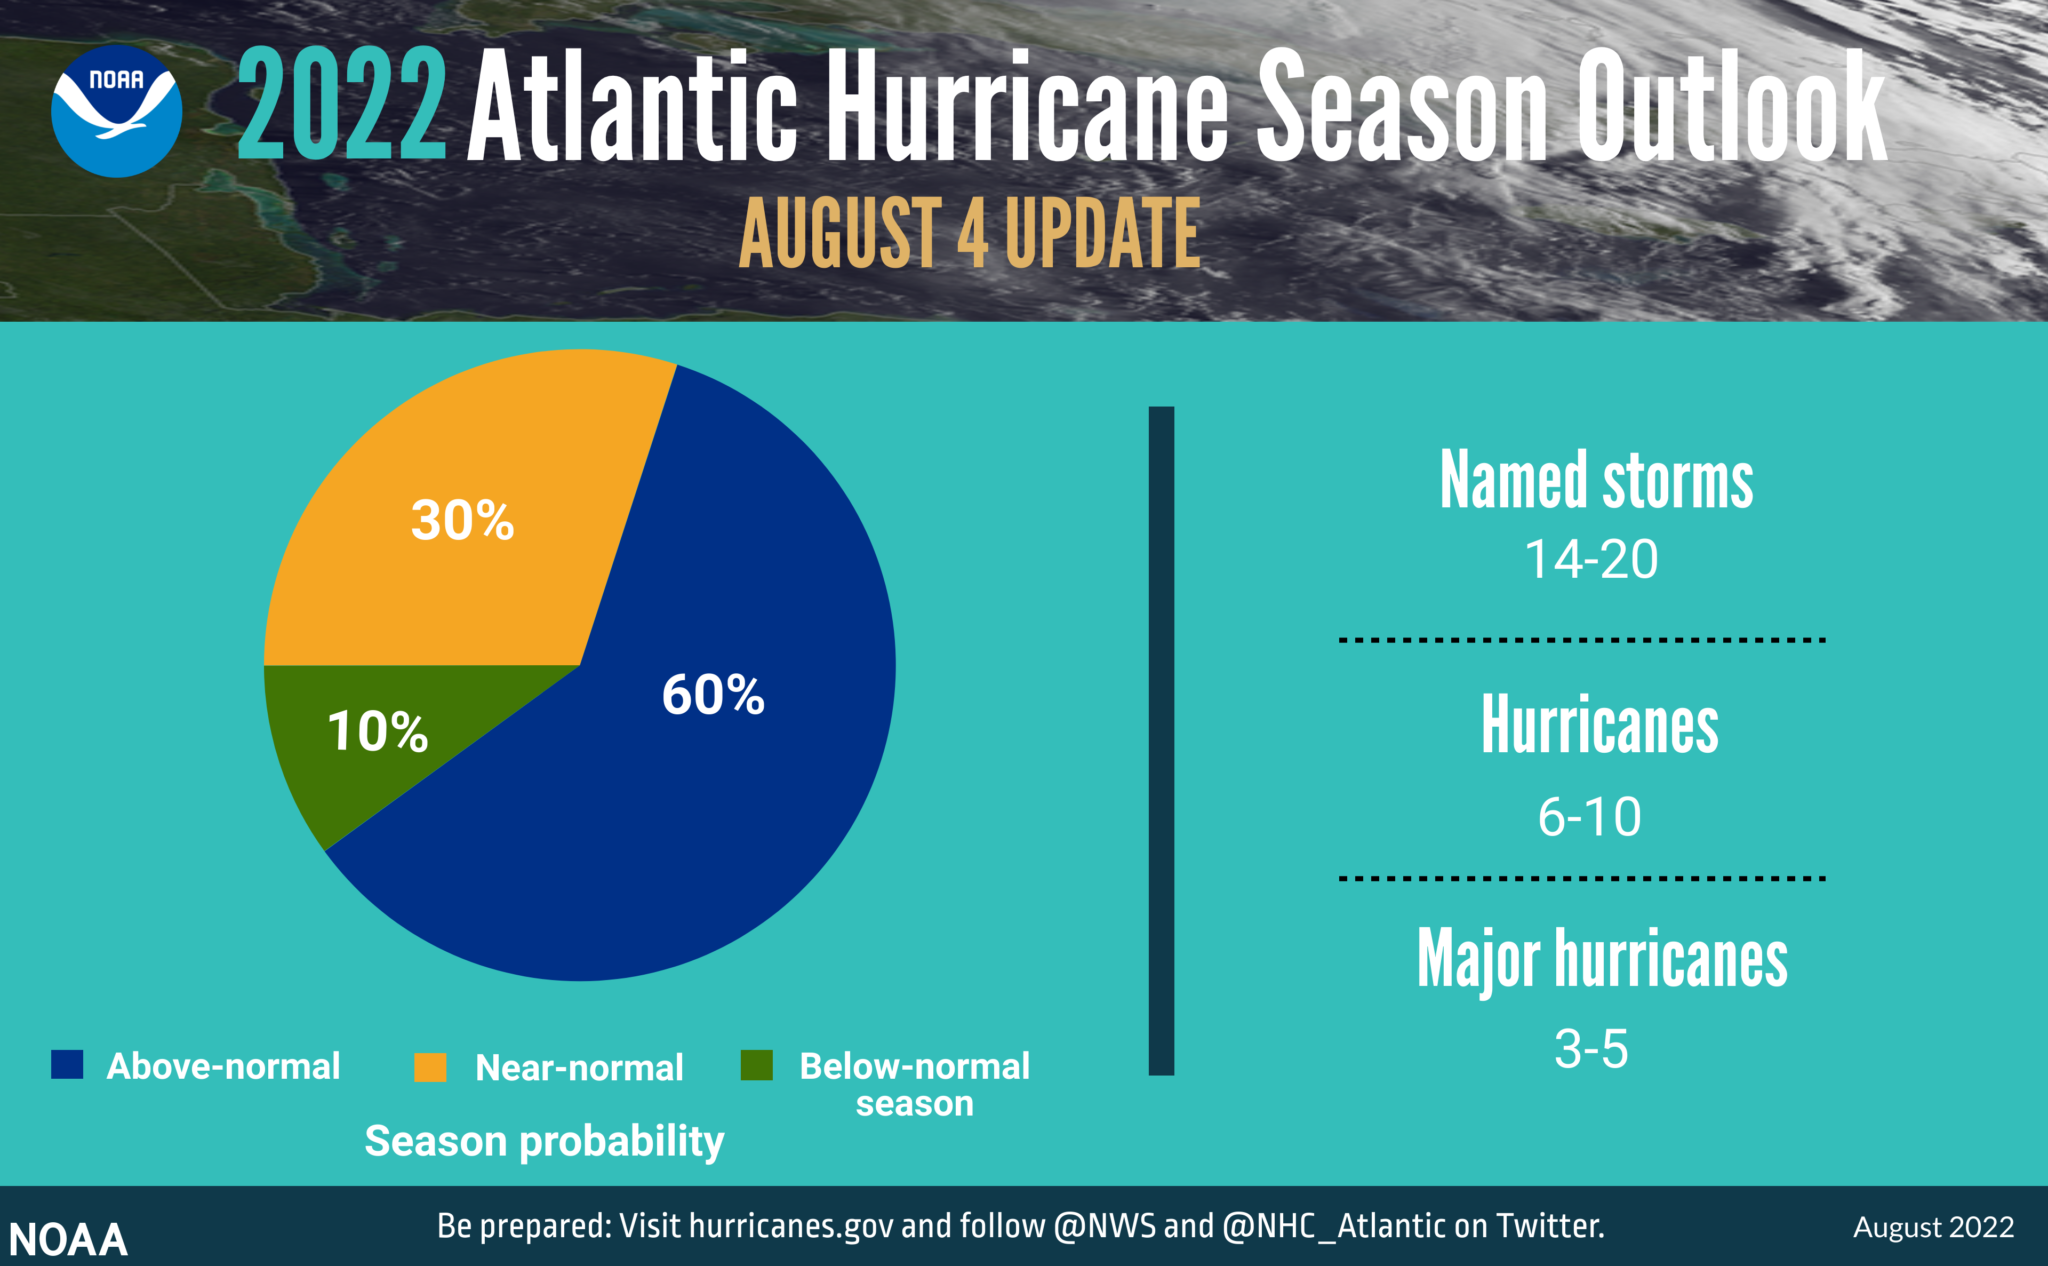 The updated 2022 Atlantic hurricane season probability and number of named storms. (Image courtesy of NOAA)